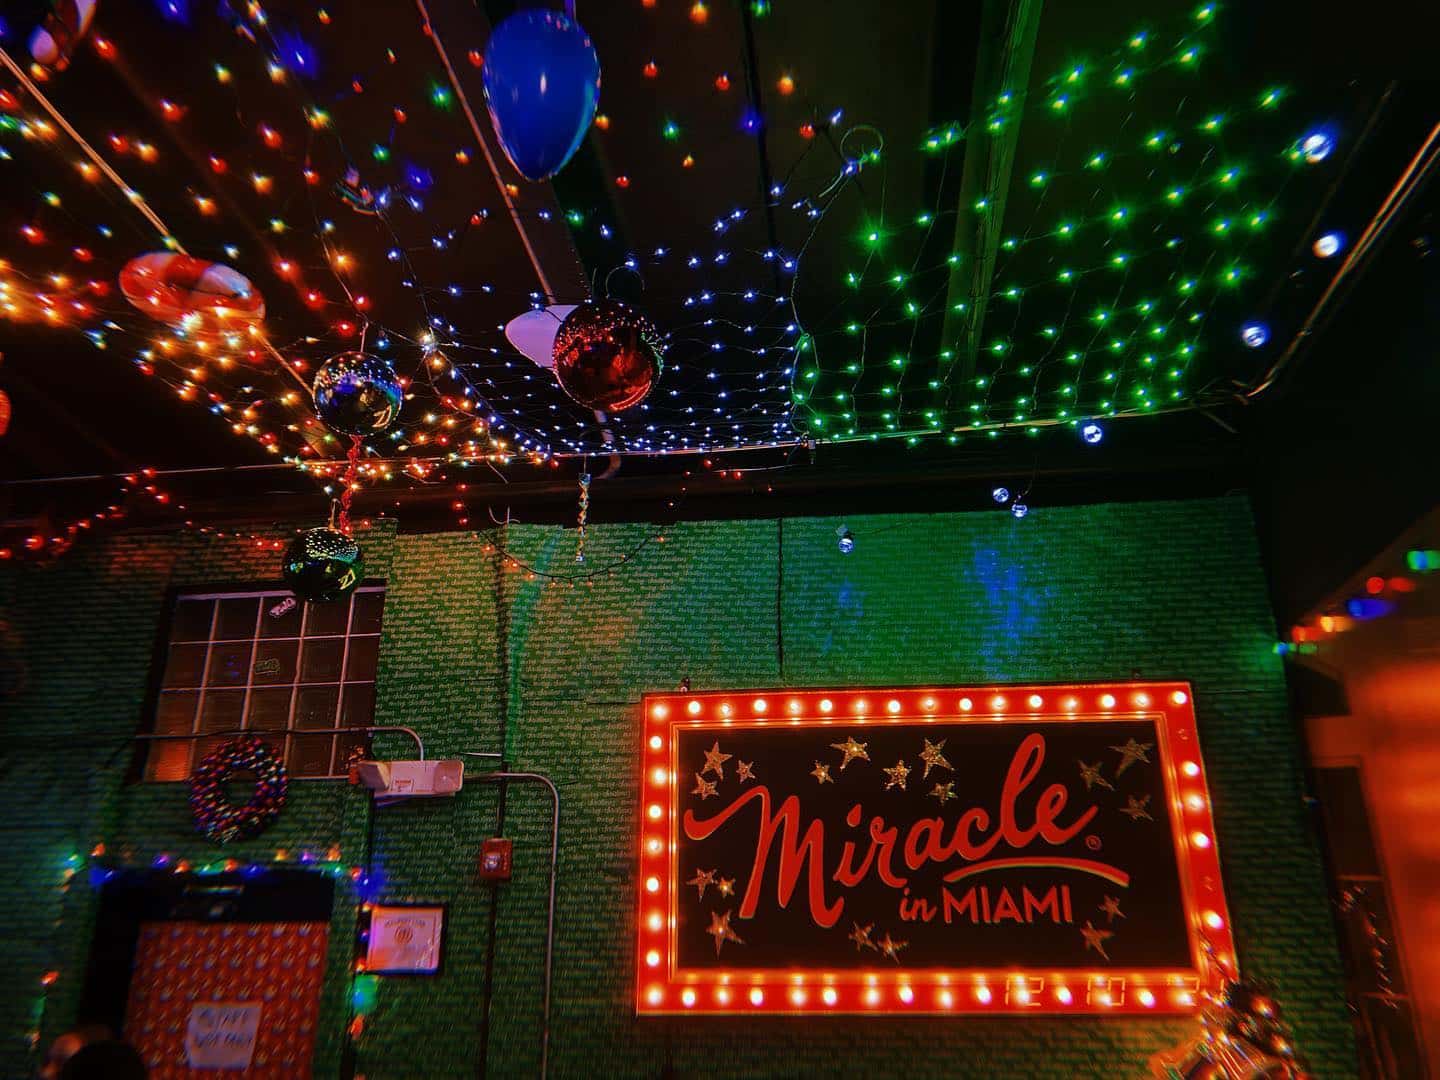 Miracle in Miami at Gramps sign and twinkling decor